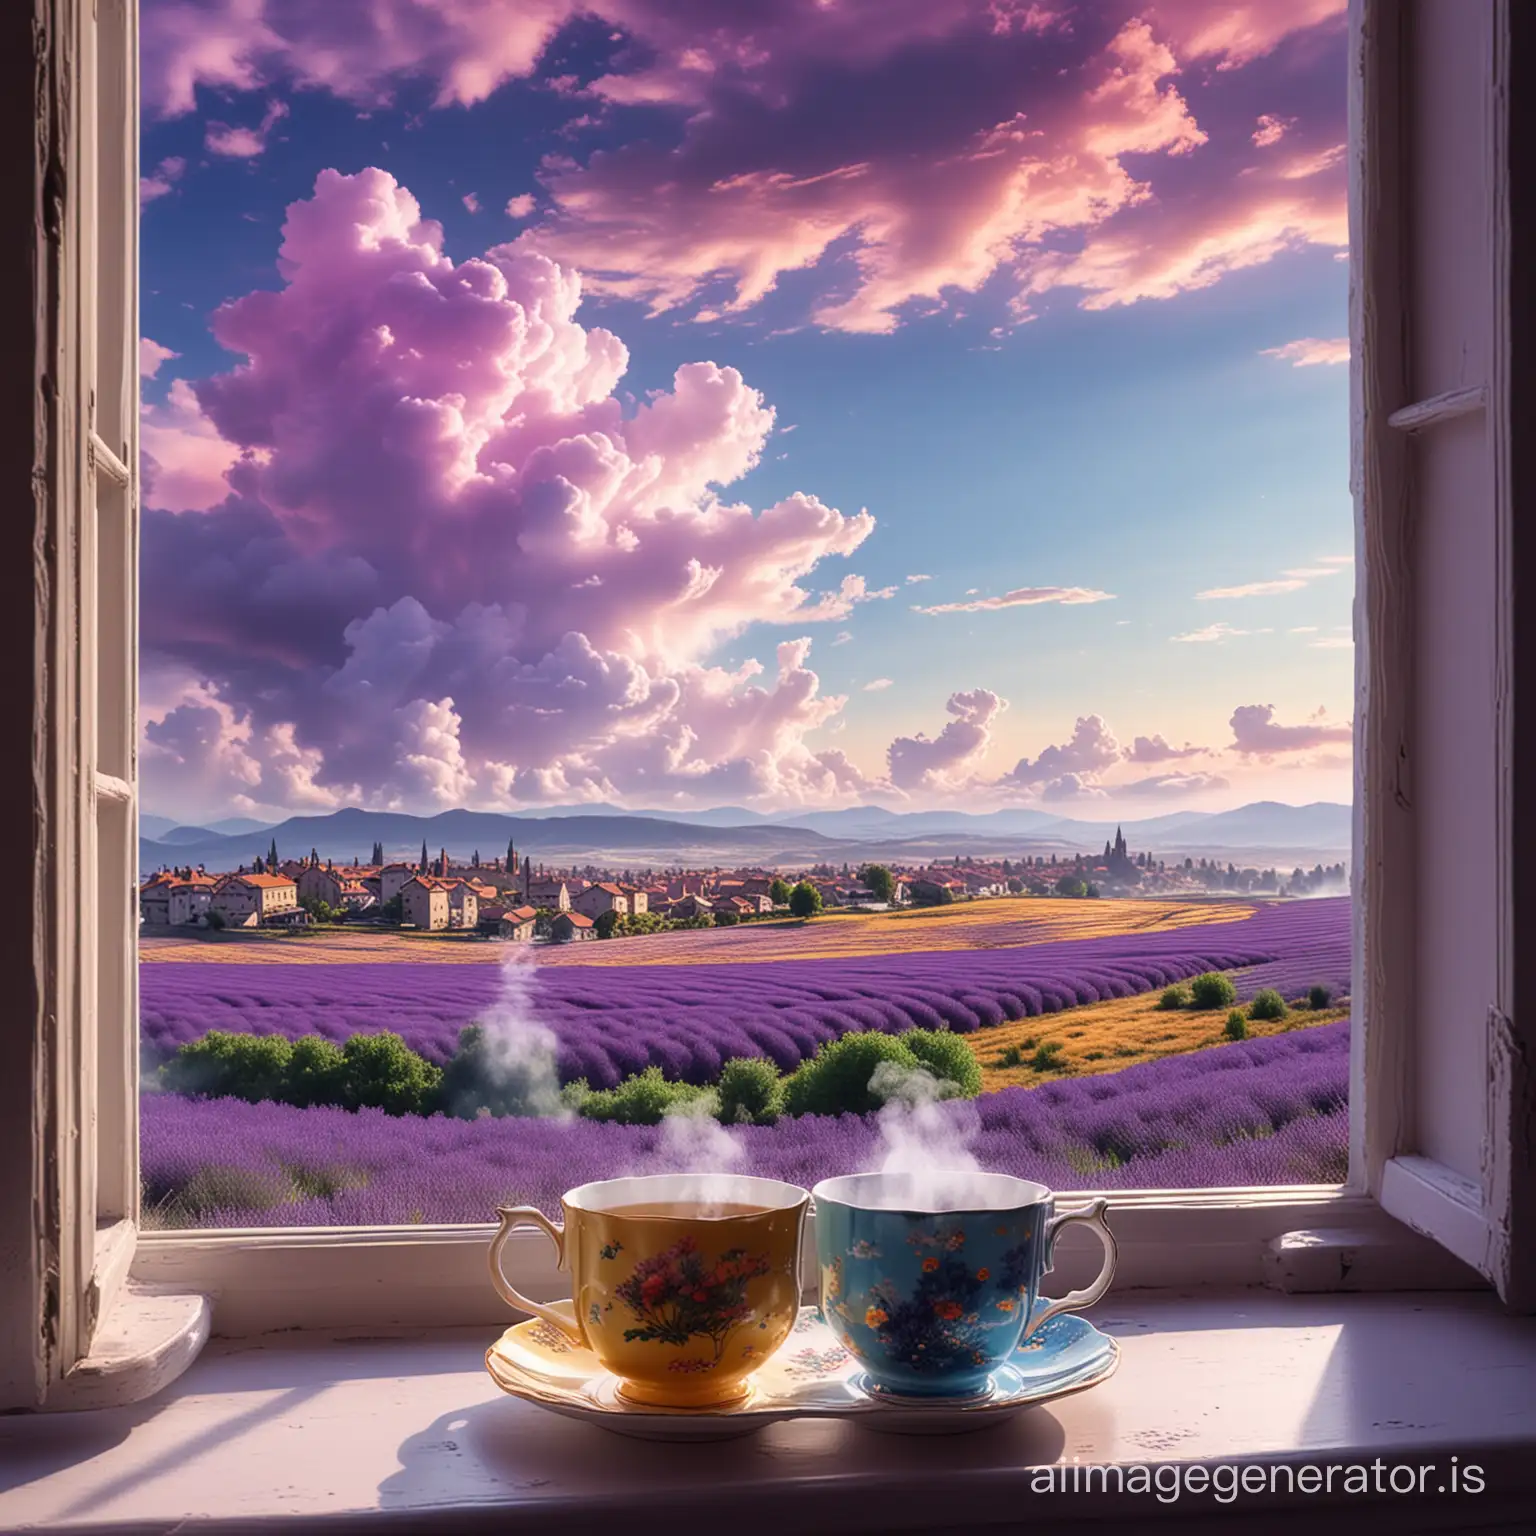 Psychedelic-Fantasy-Tea-Cup-with-Lavender-Clouds